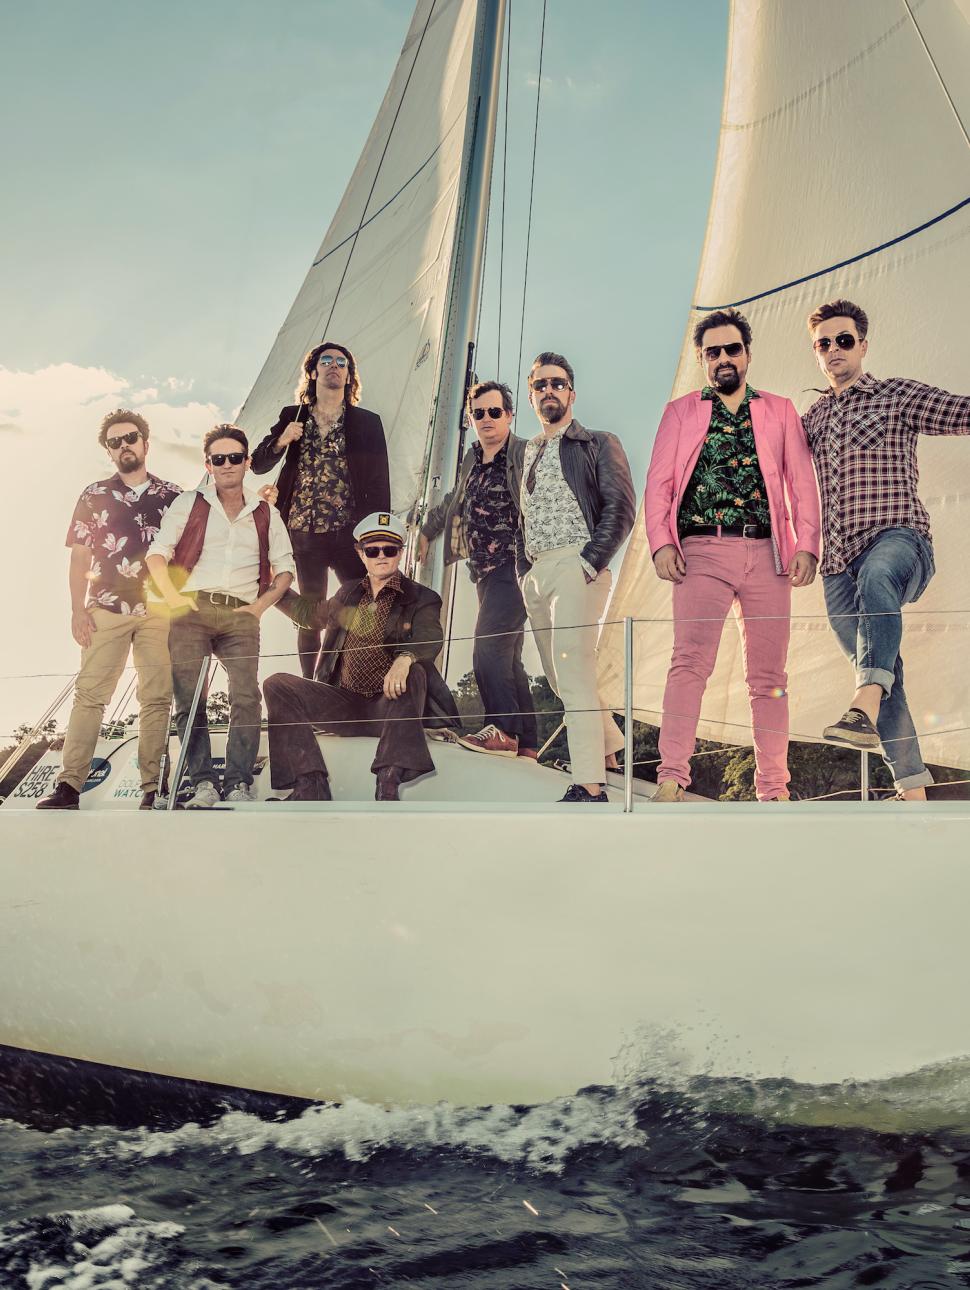 Image of Perth yacht rock band Some Like It Yacht relaxing on board a real yacht.